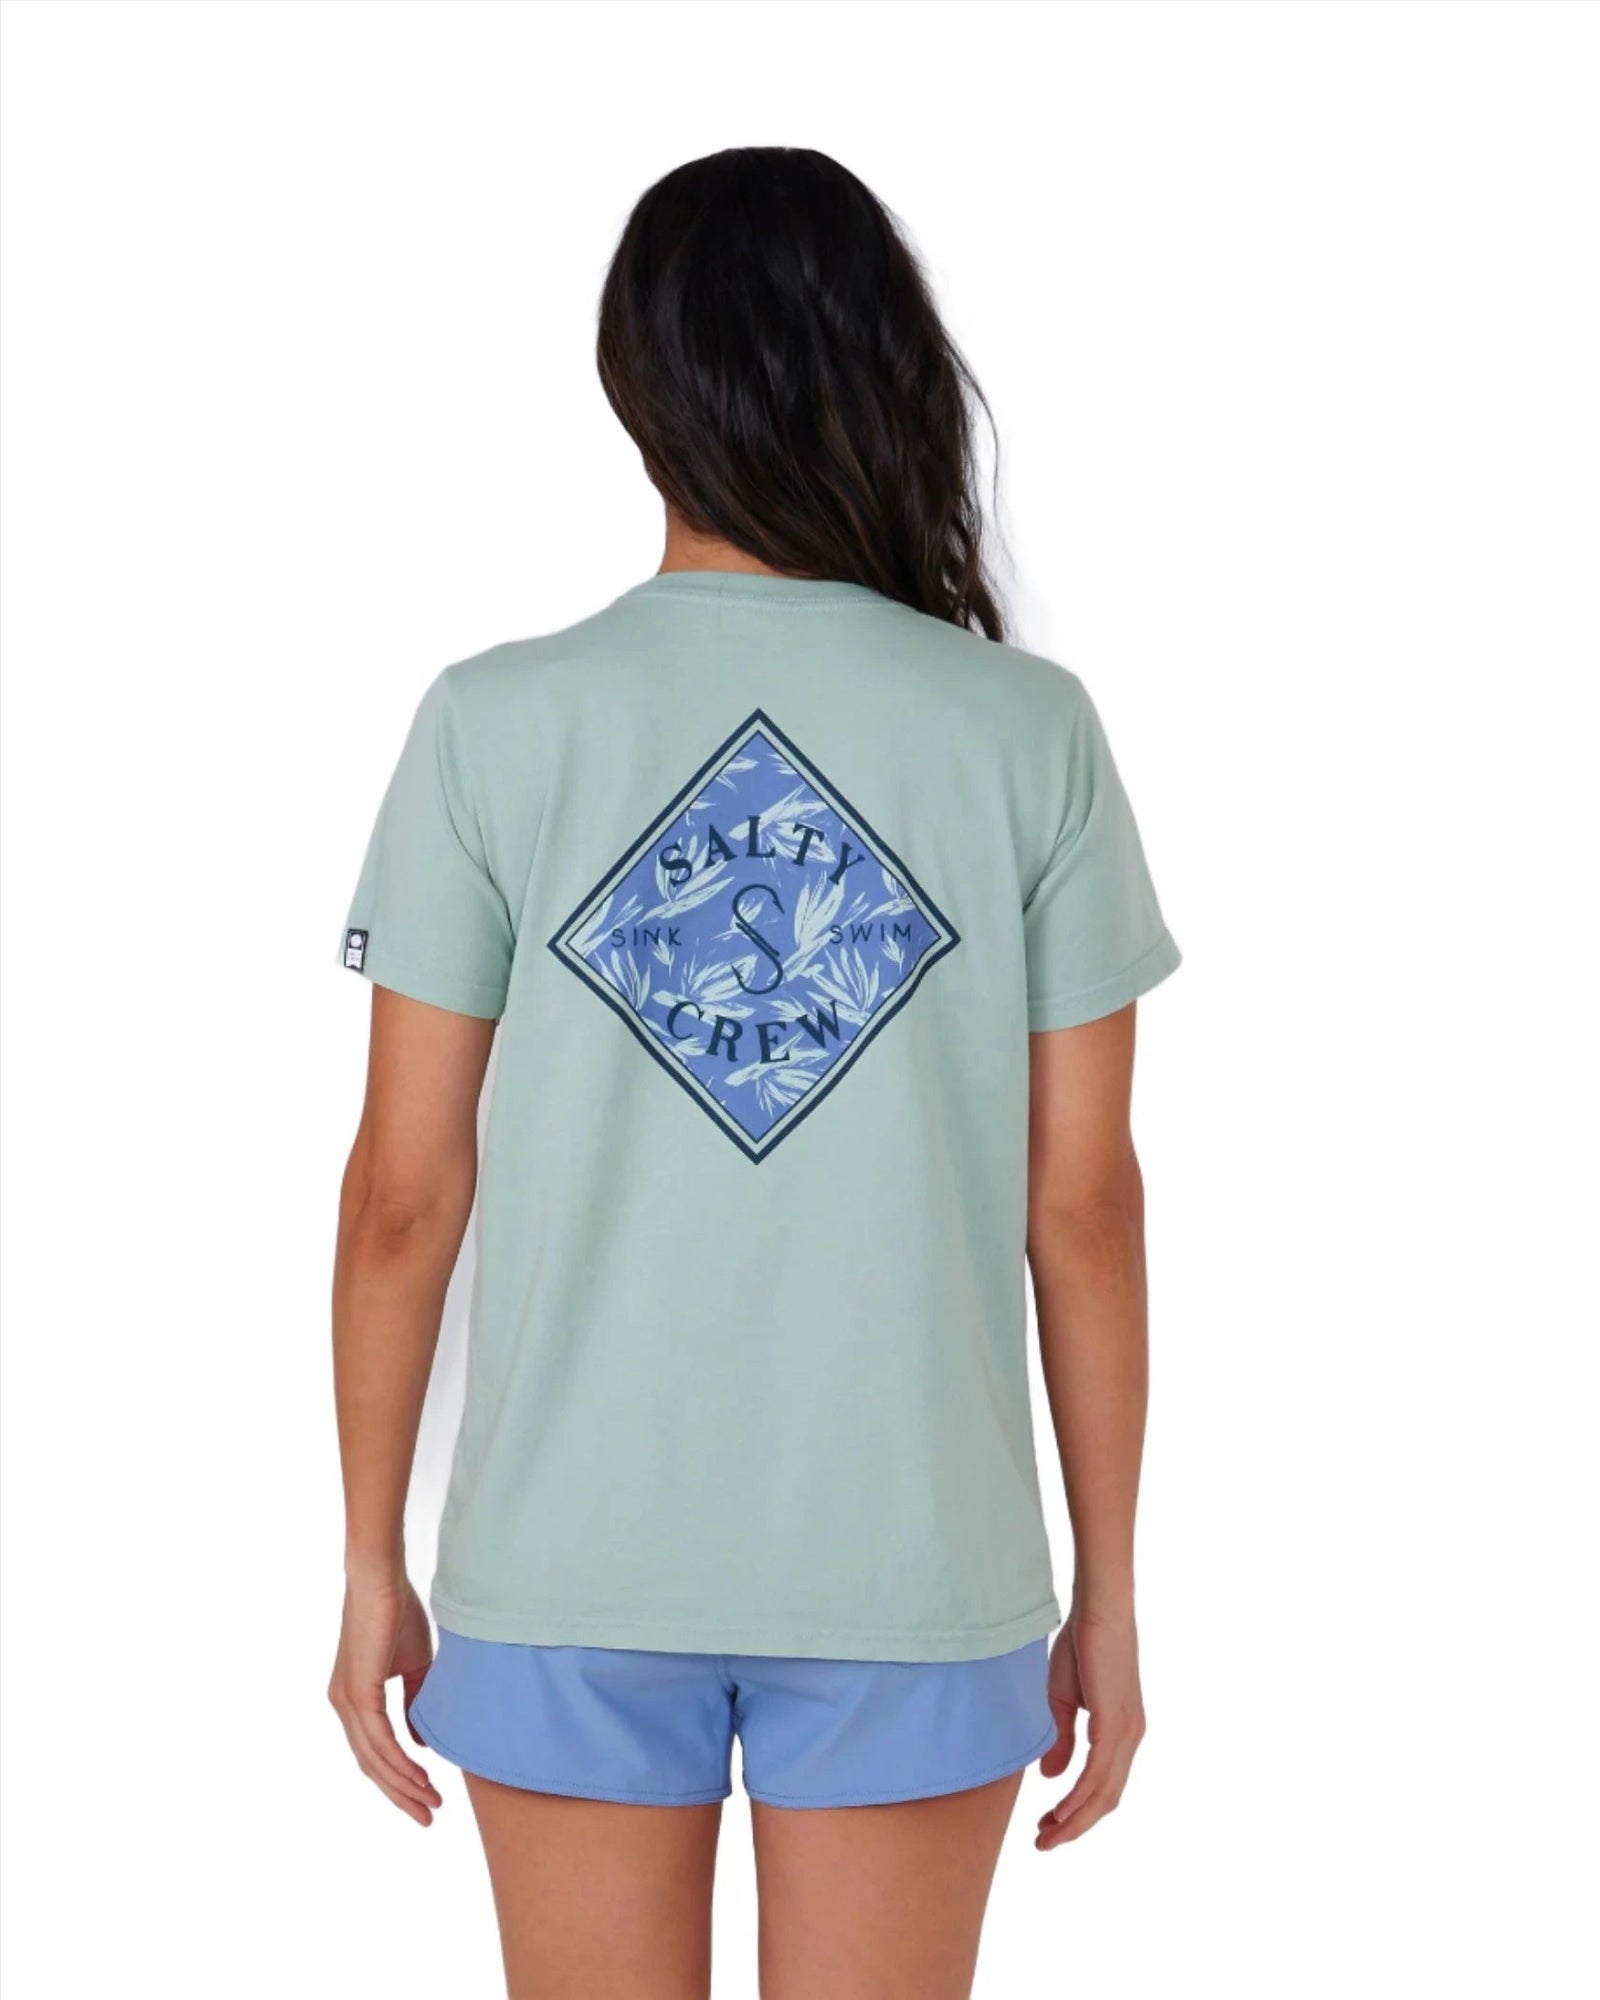 Shop Name Brand Womens T-Shirts Online in Canada at Freeride Boardshop